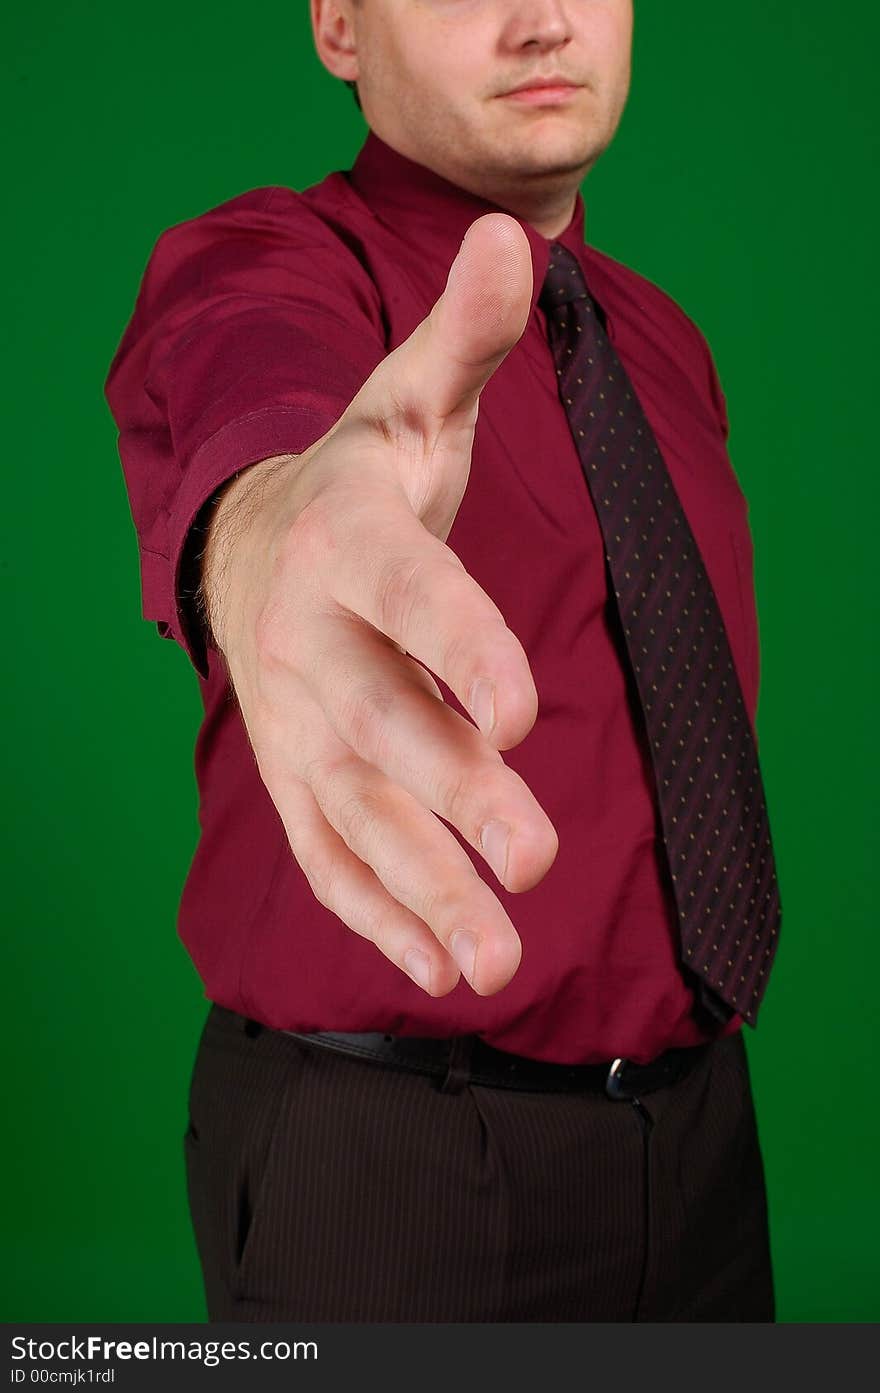 The stretched hand of the businessman in a tie